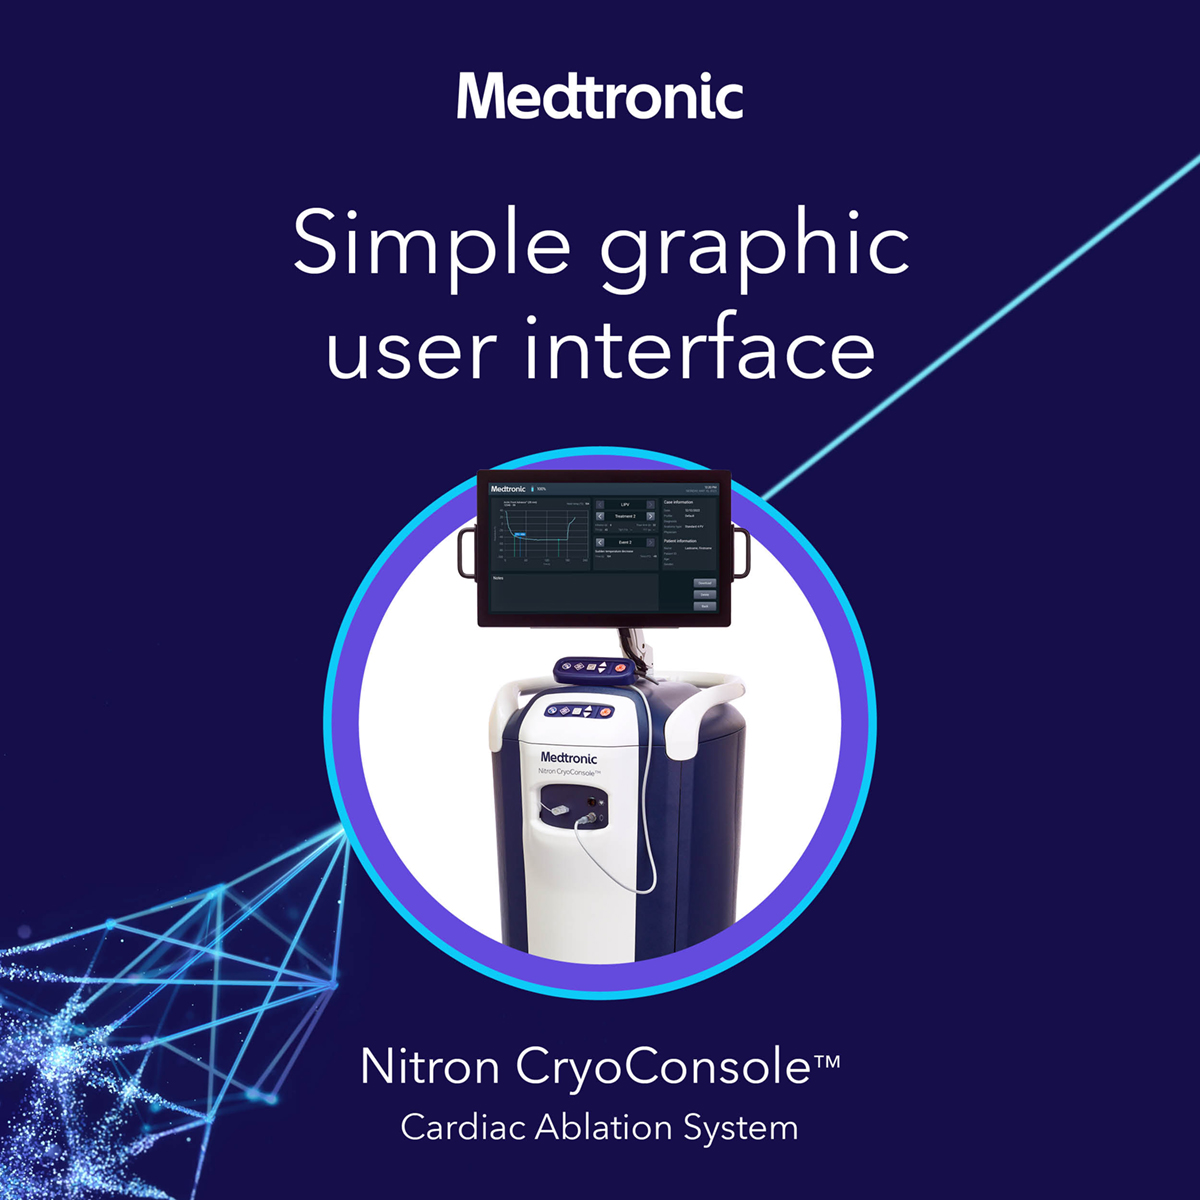 The Nitron CryoConsole™ system offers a simple GUI with intuitive system operation guidance, custom user profiles, and visual indicators of procedure parameters like TTI, previous freeze trace. Learn more: bit.ly/4bgYr8Q See risk/benefit info: bit.ly/4bdy2Jd